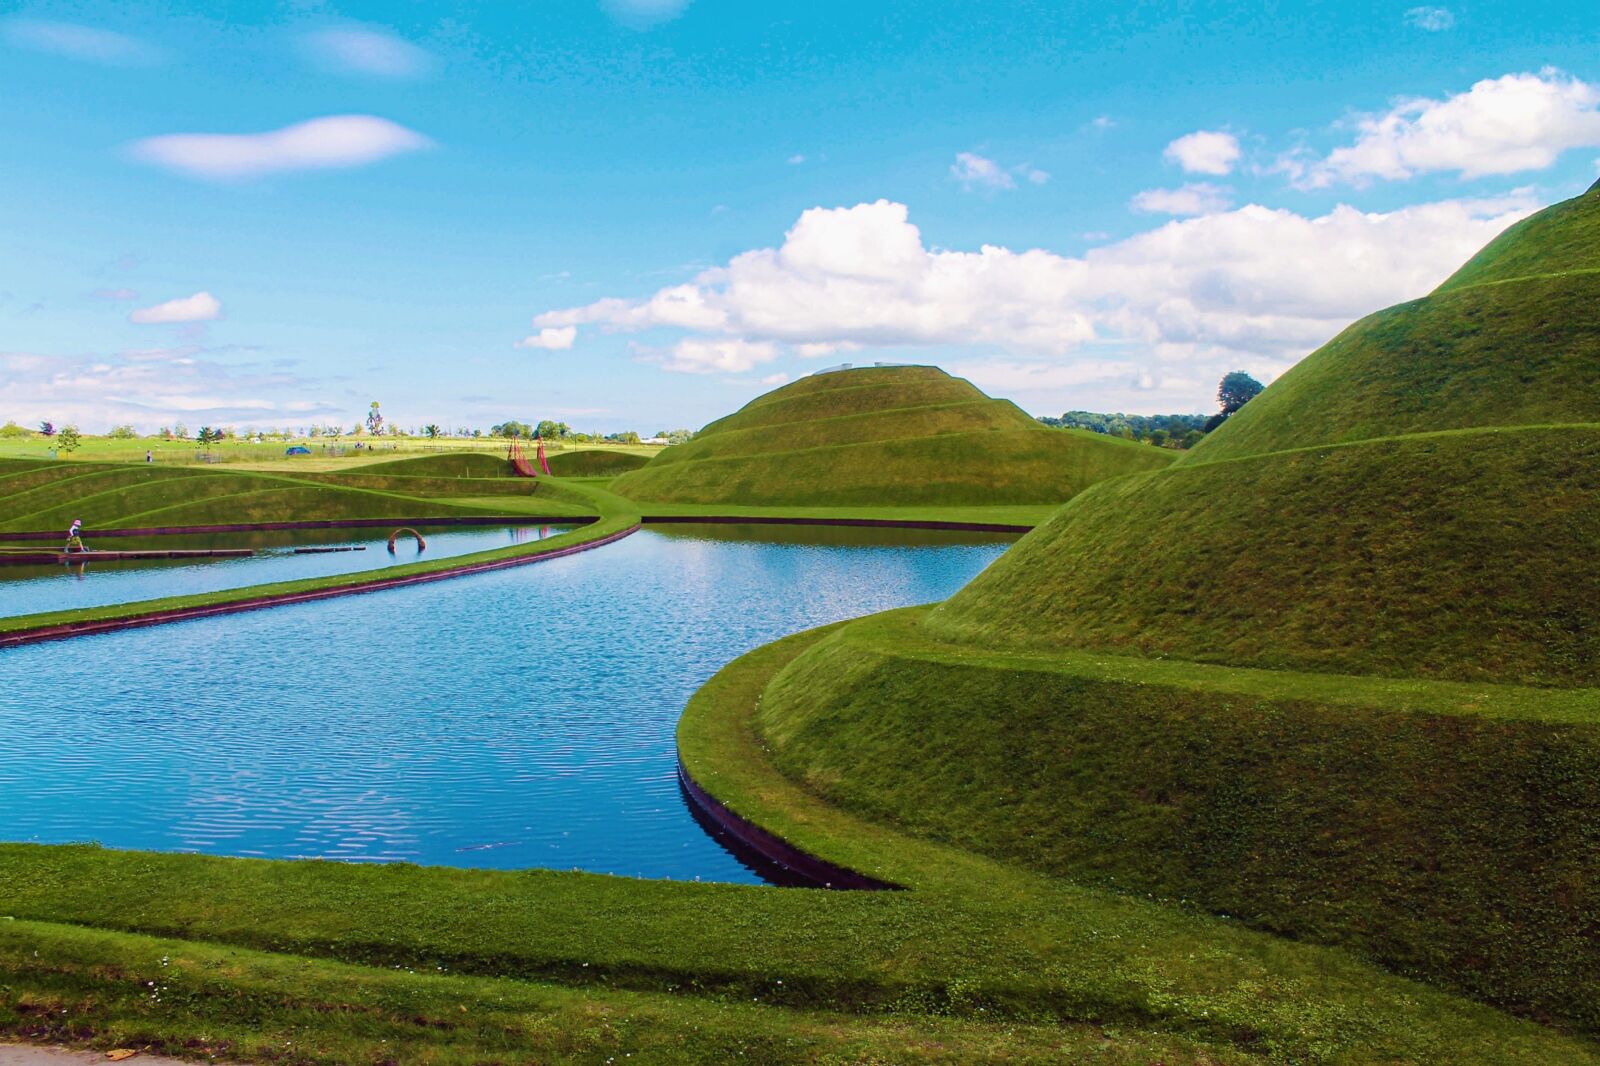 Jupiter Artland is a large unusual park with garden, rivers and sculptures